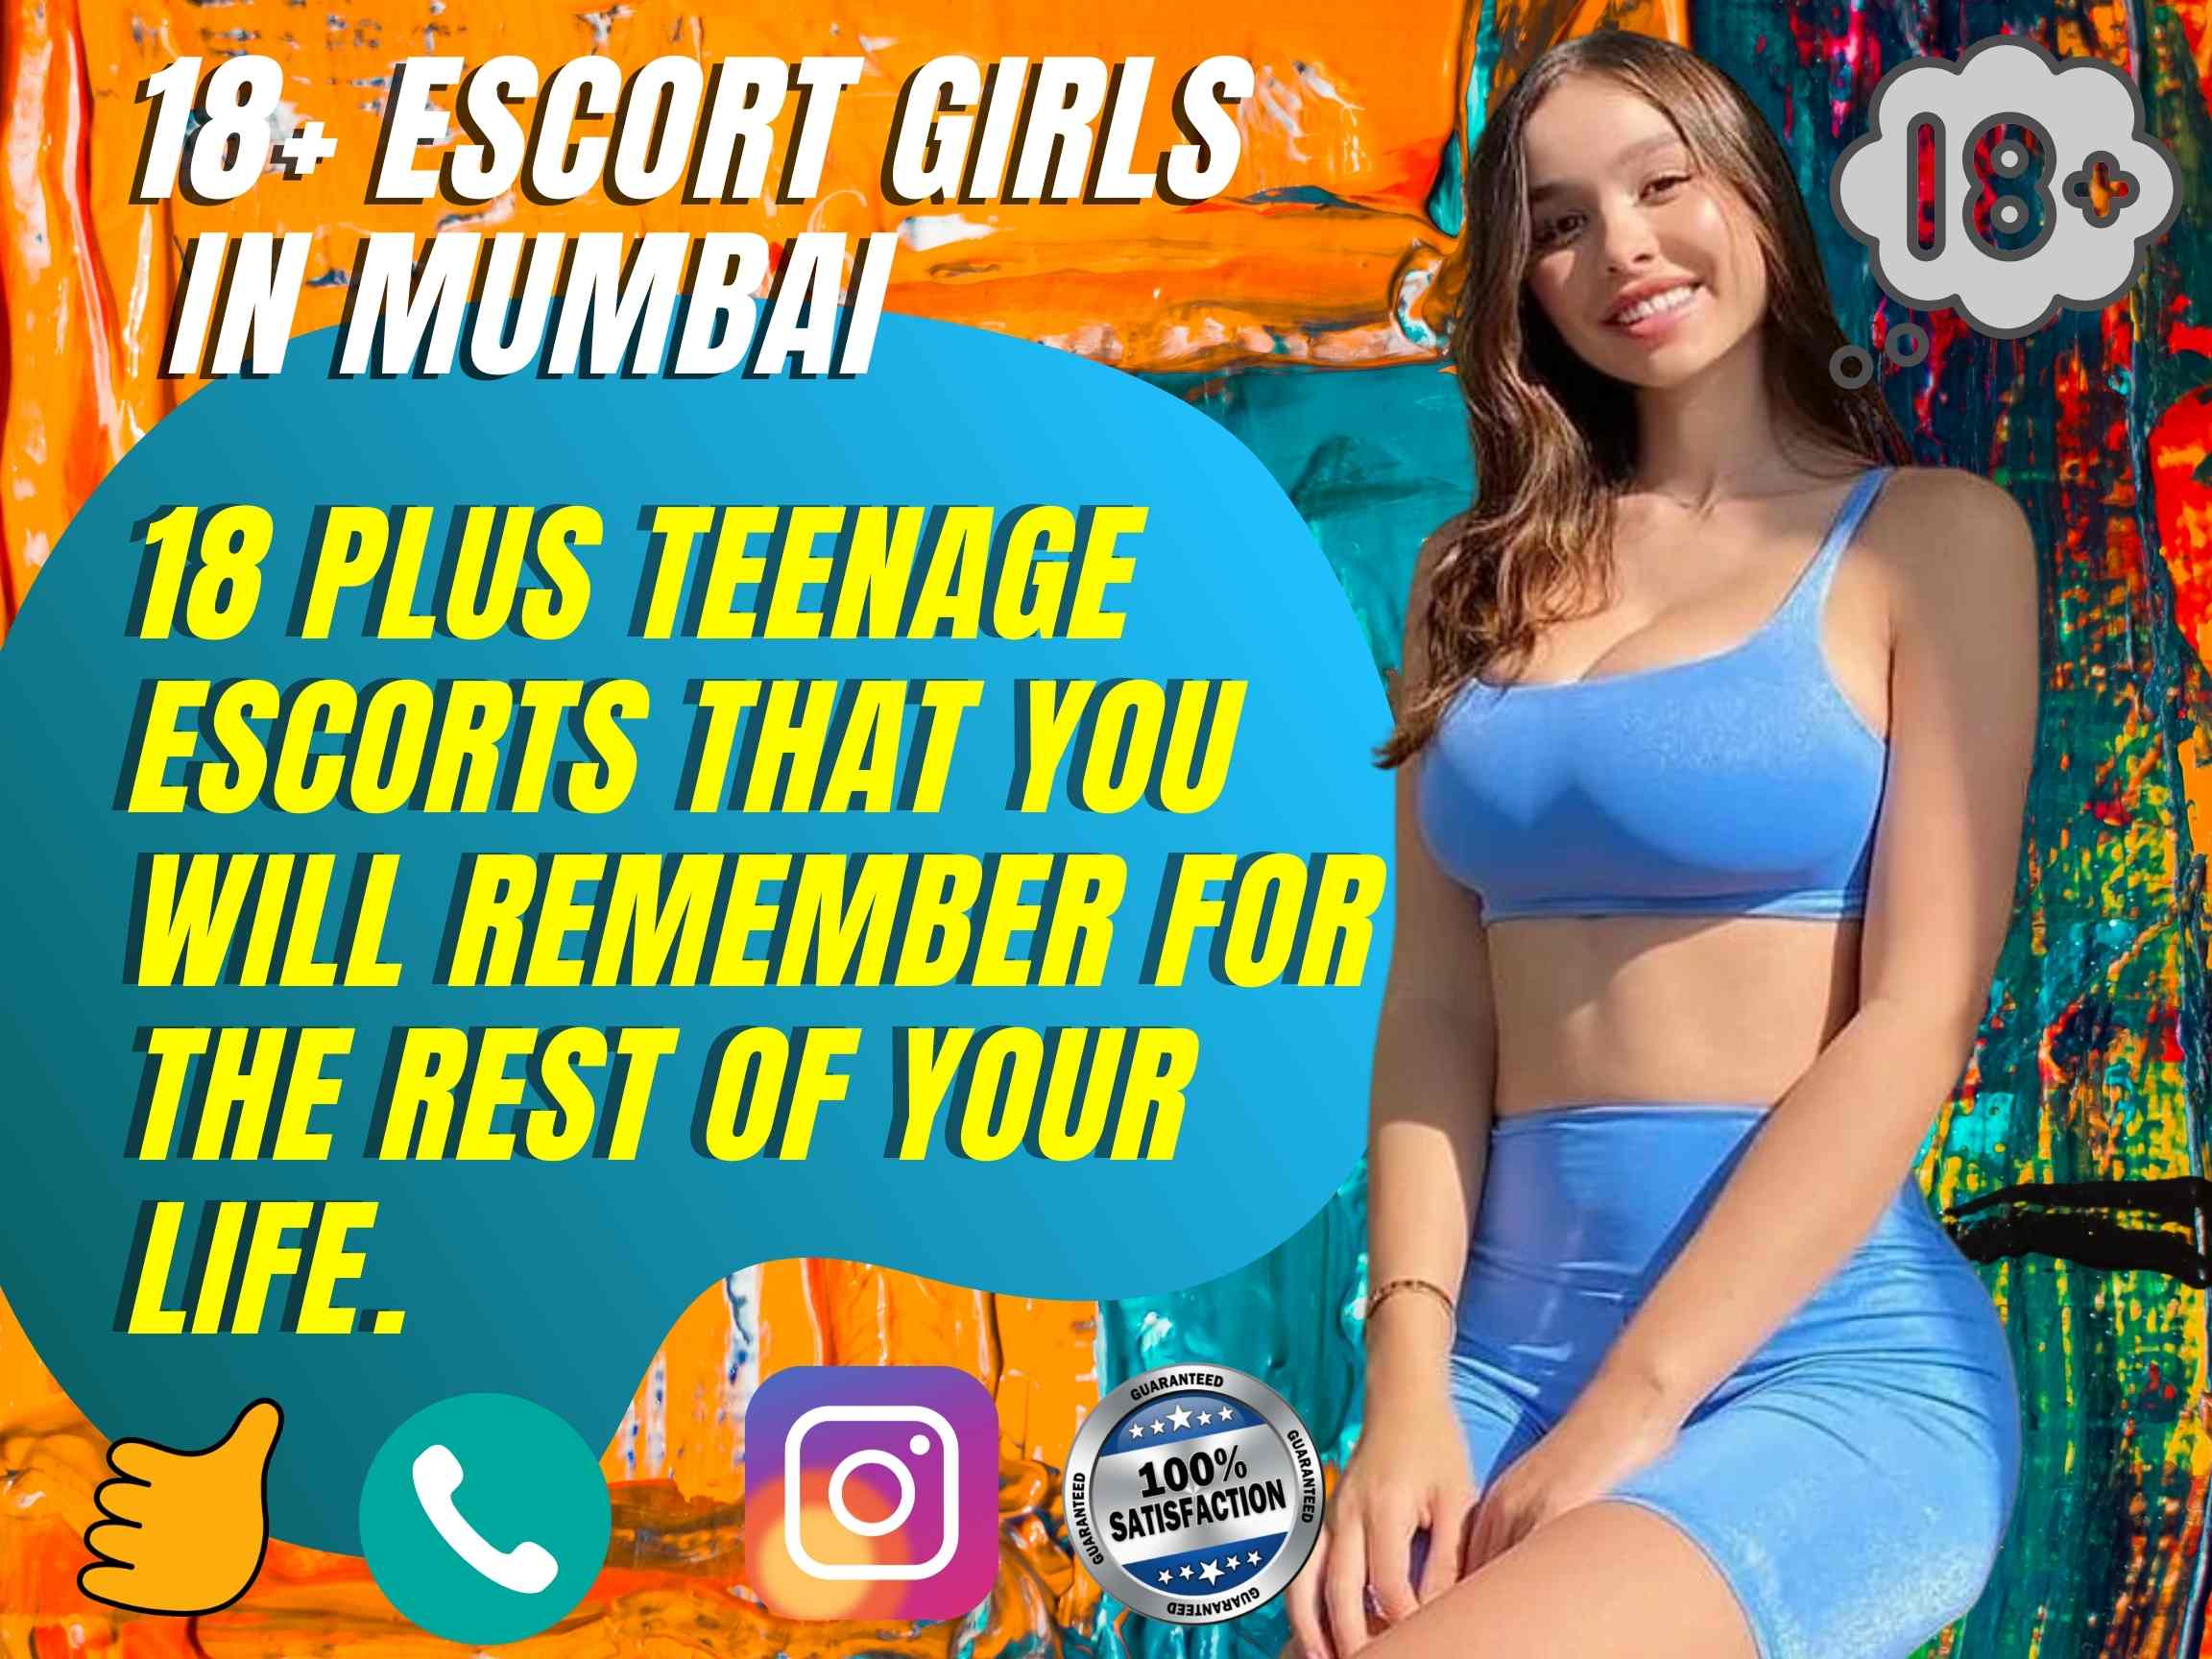 18+ Escort Girls in Mumbai - 18 plus Teenage Escorts that you will remember for the rest of your life.